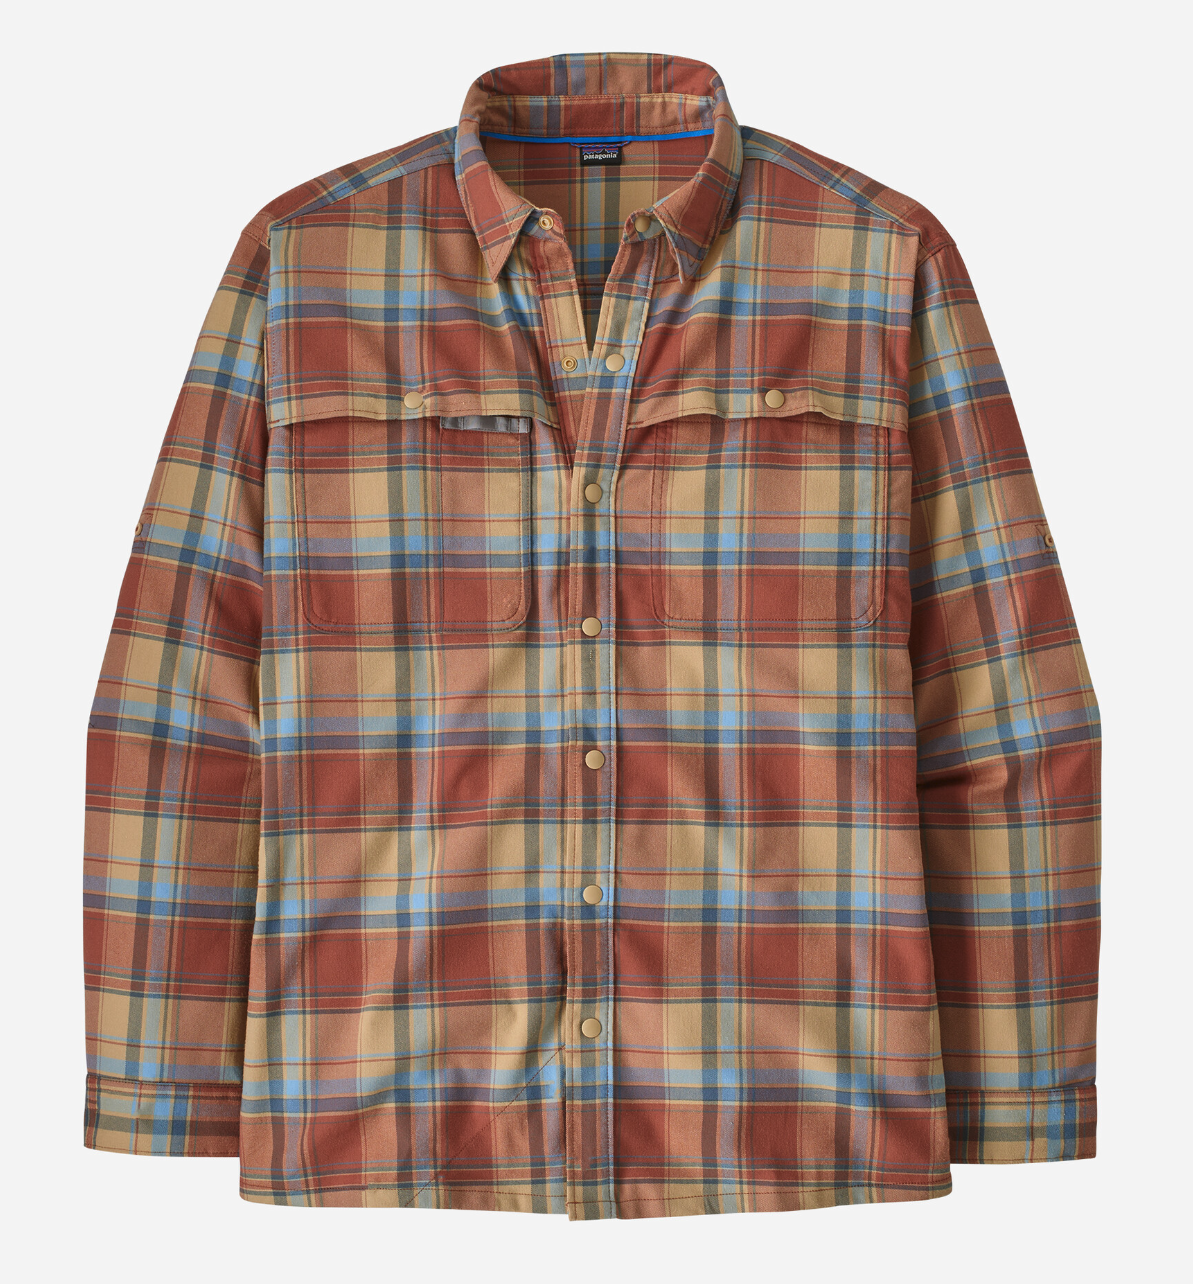 Patagonia Early Rise Stretch Shirt for sale online is a best sun protection fly fishing shirt.